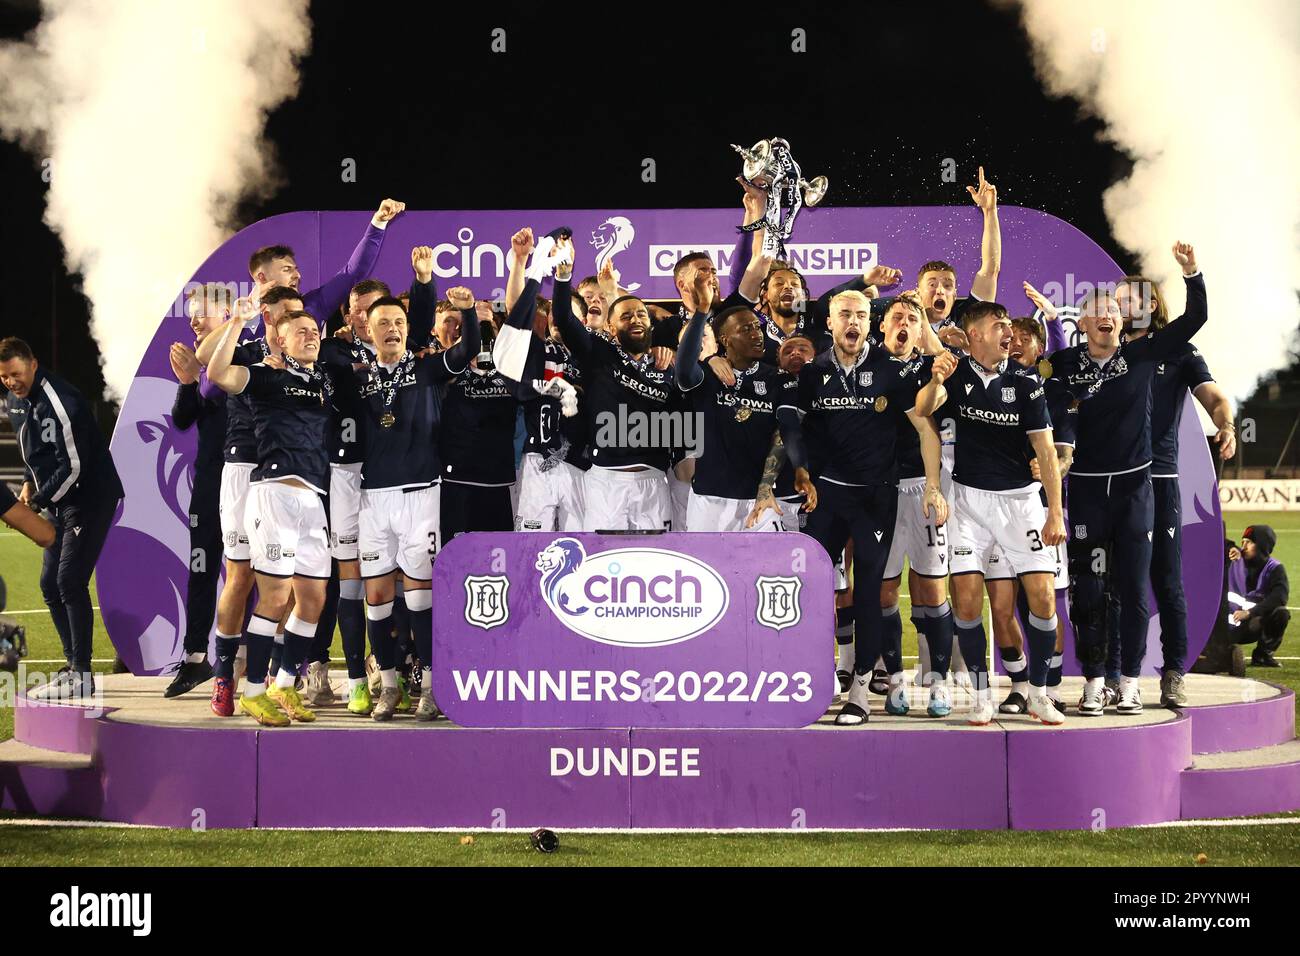 dundee-players-celebrate-with-the-trophy-after-winning-the-league